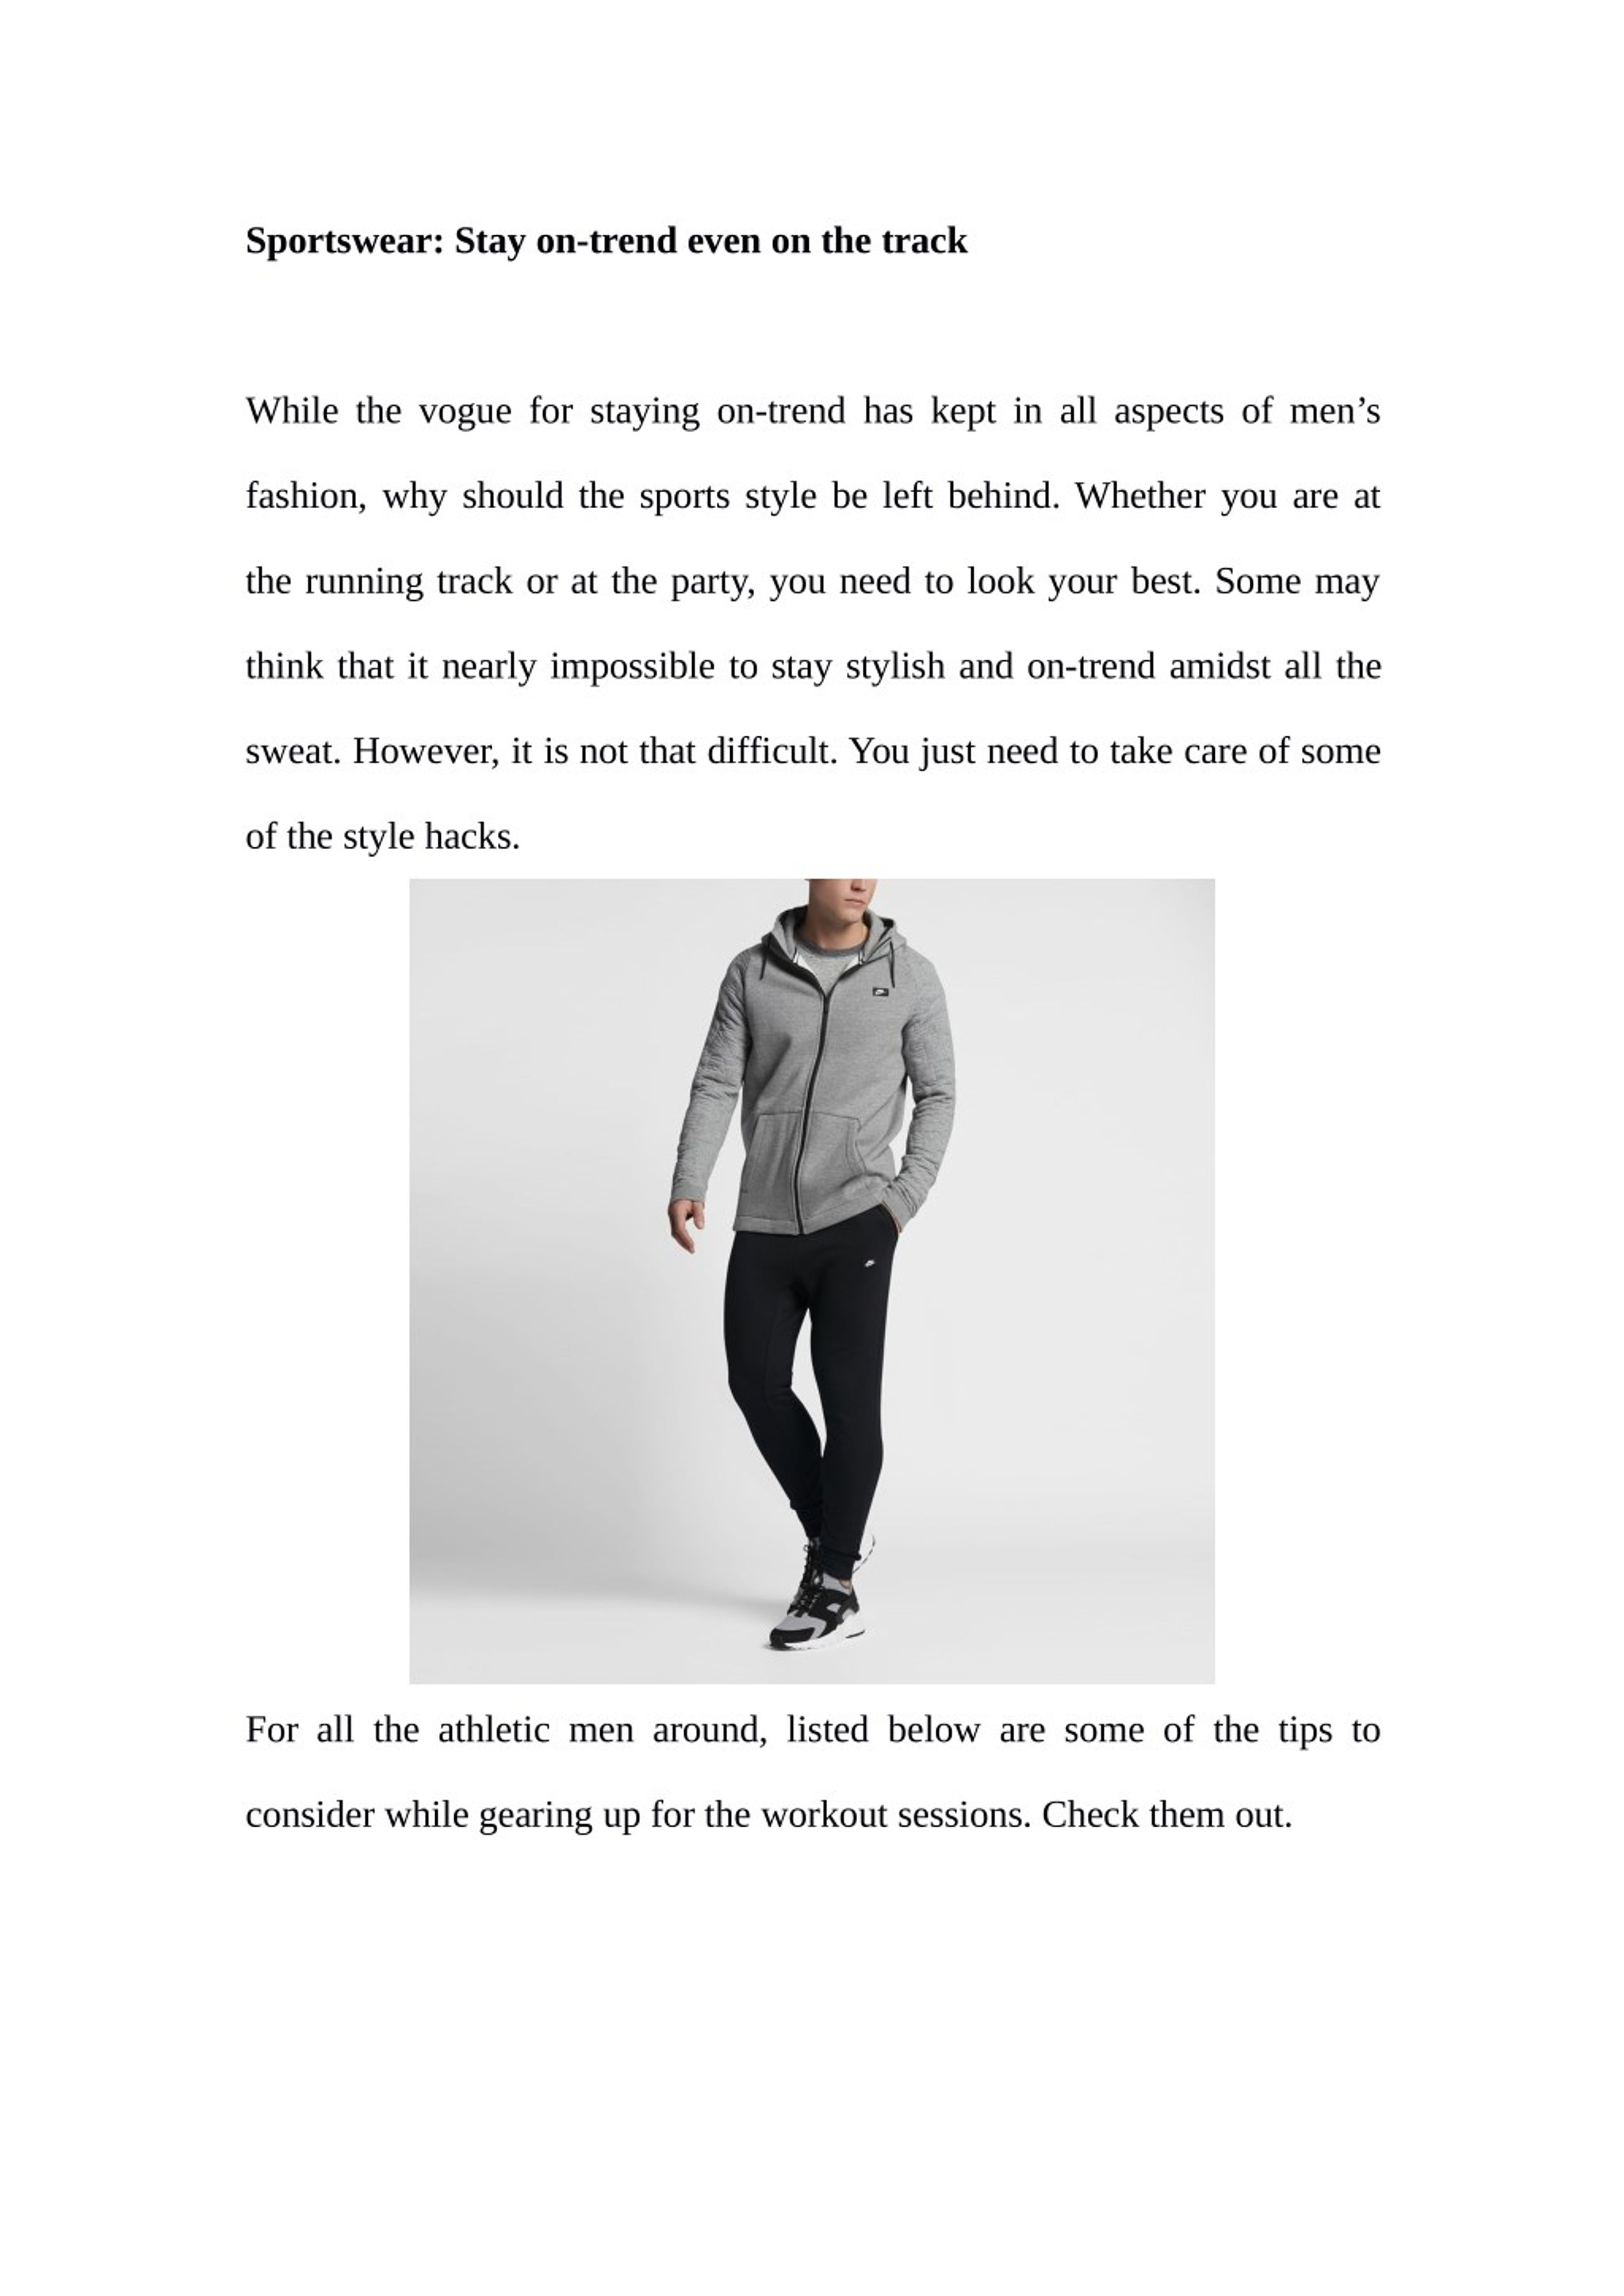 PPT - Sportswear: Stay on-trend even on the track PowerPoint ...